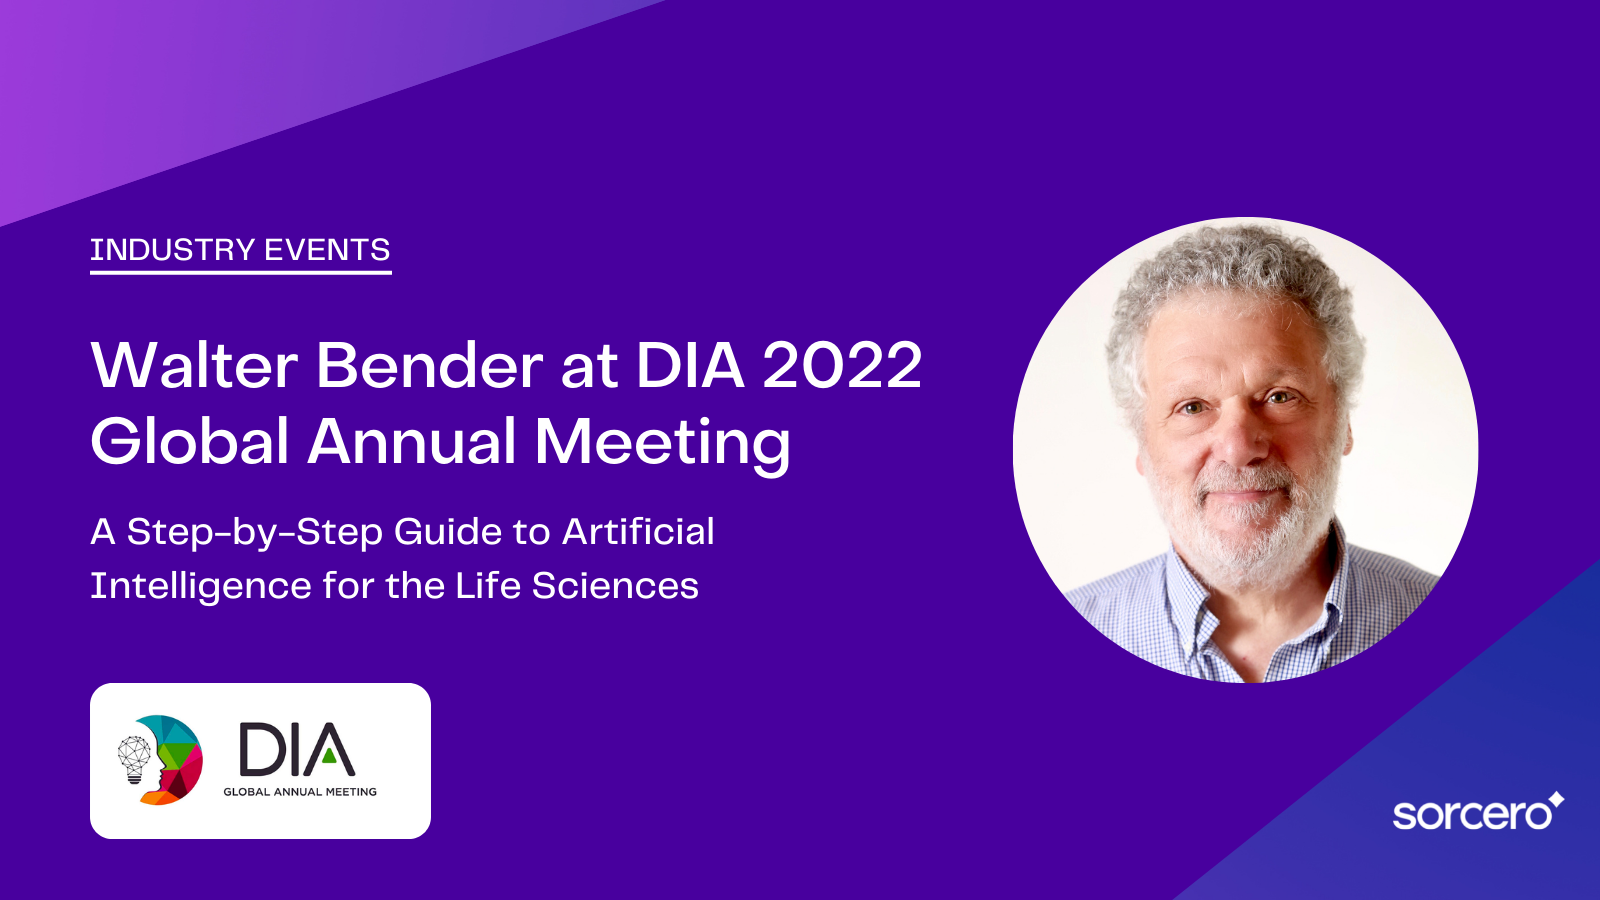 Sorcero CTO and Co-founder Walter Bender to Lead Artificial Intelligence Primer at DIA 2022 Global Annual Meeting